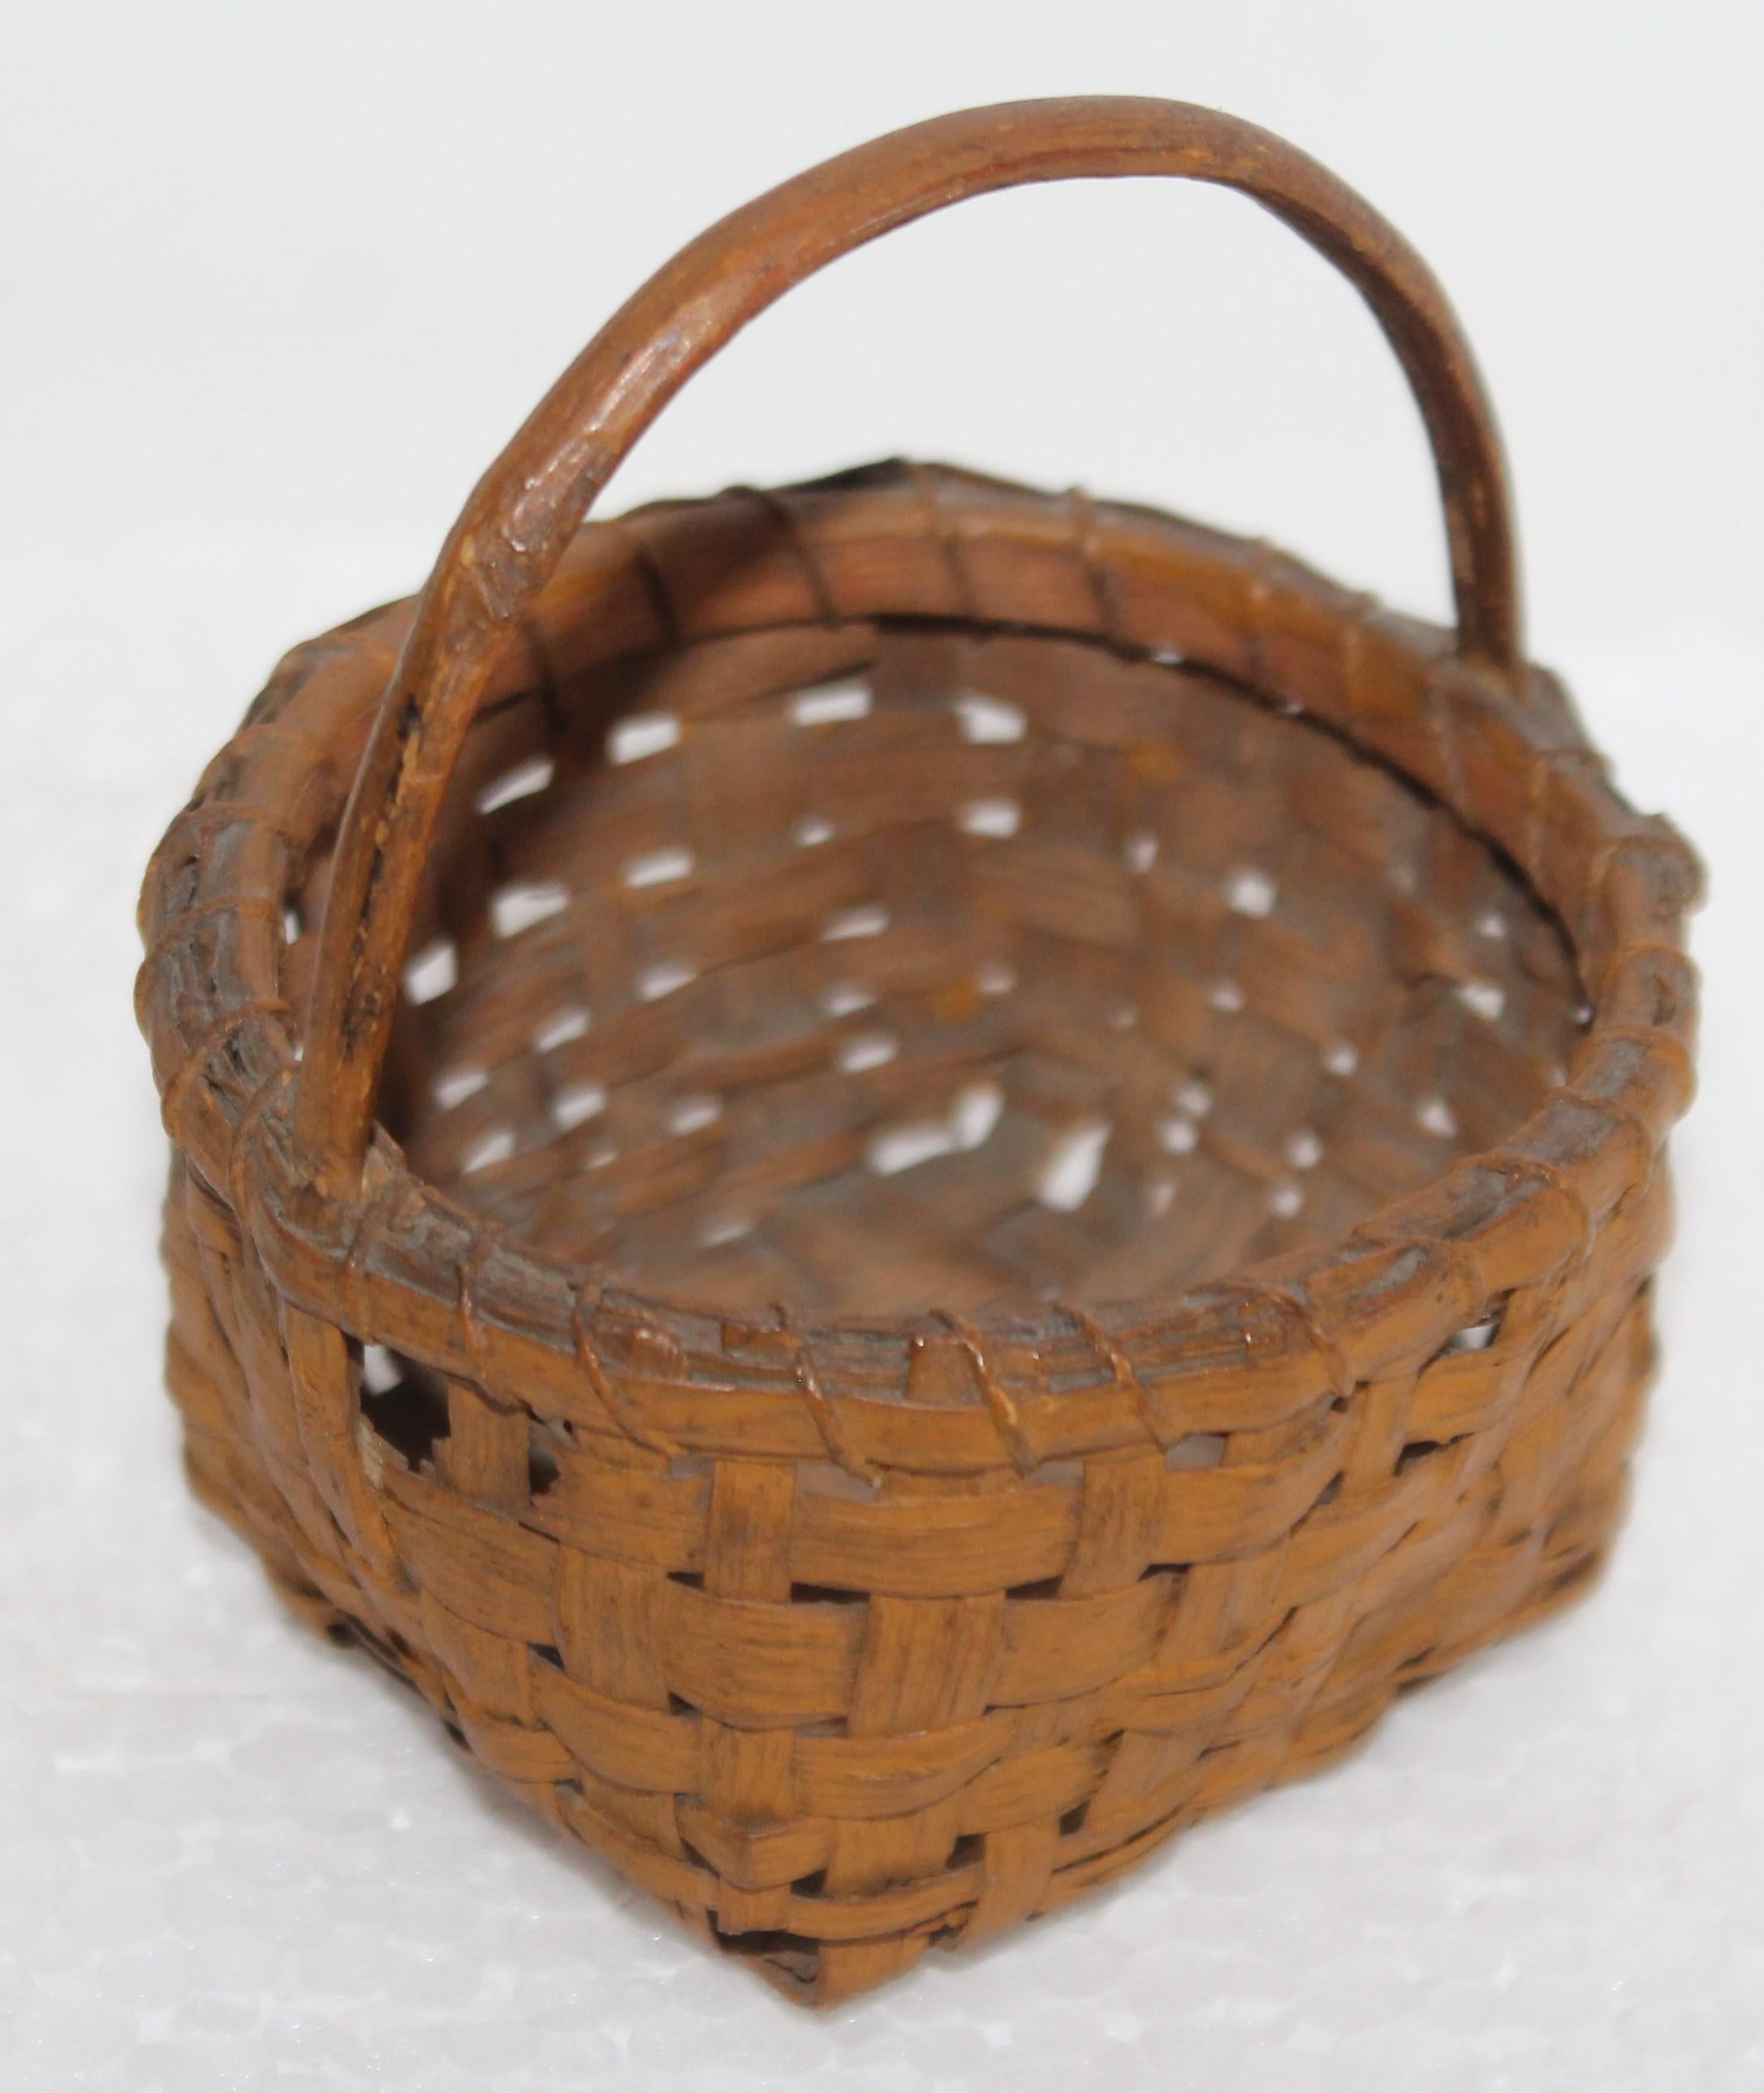 19th century miniature basket in original mustard painted surface. Minor small breaks on base or corners.